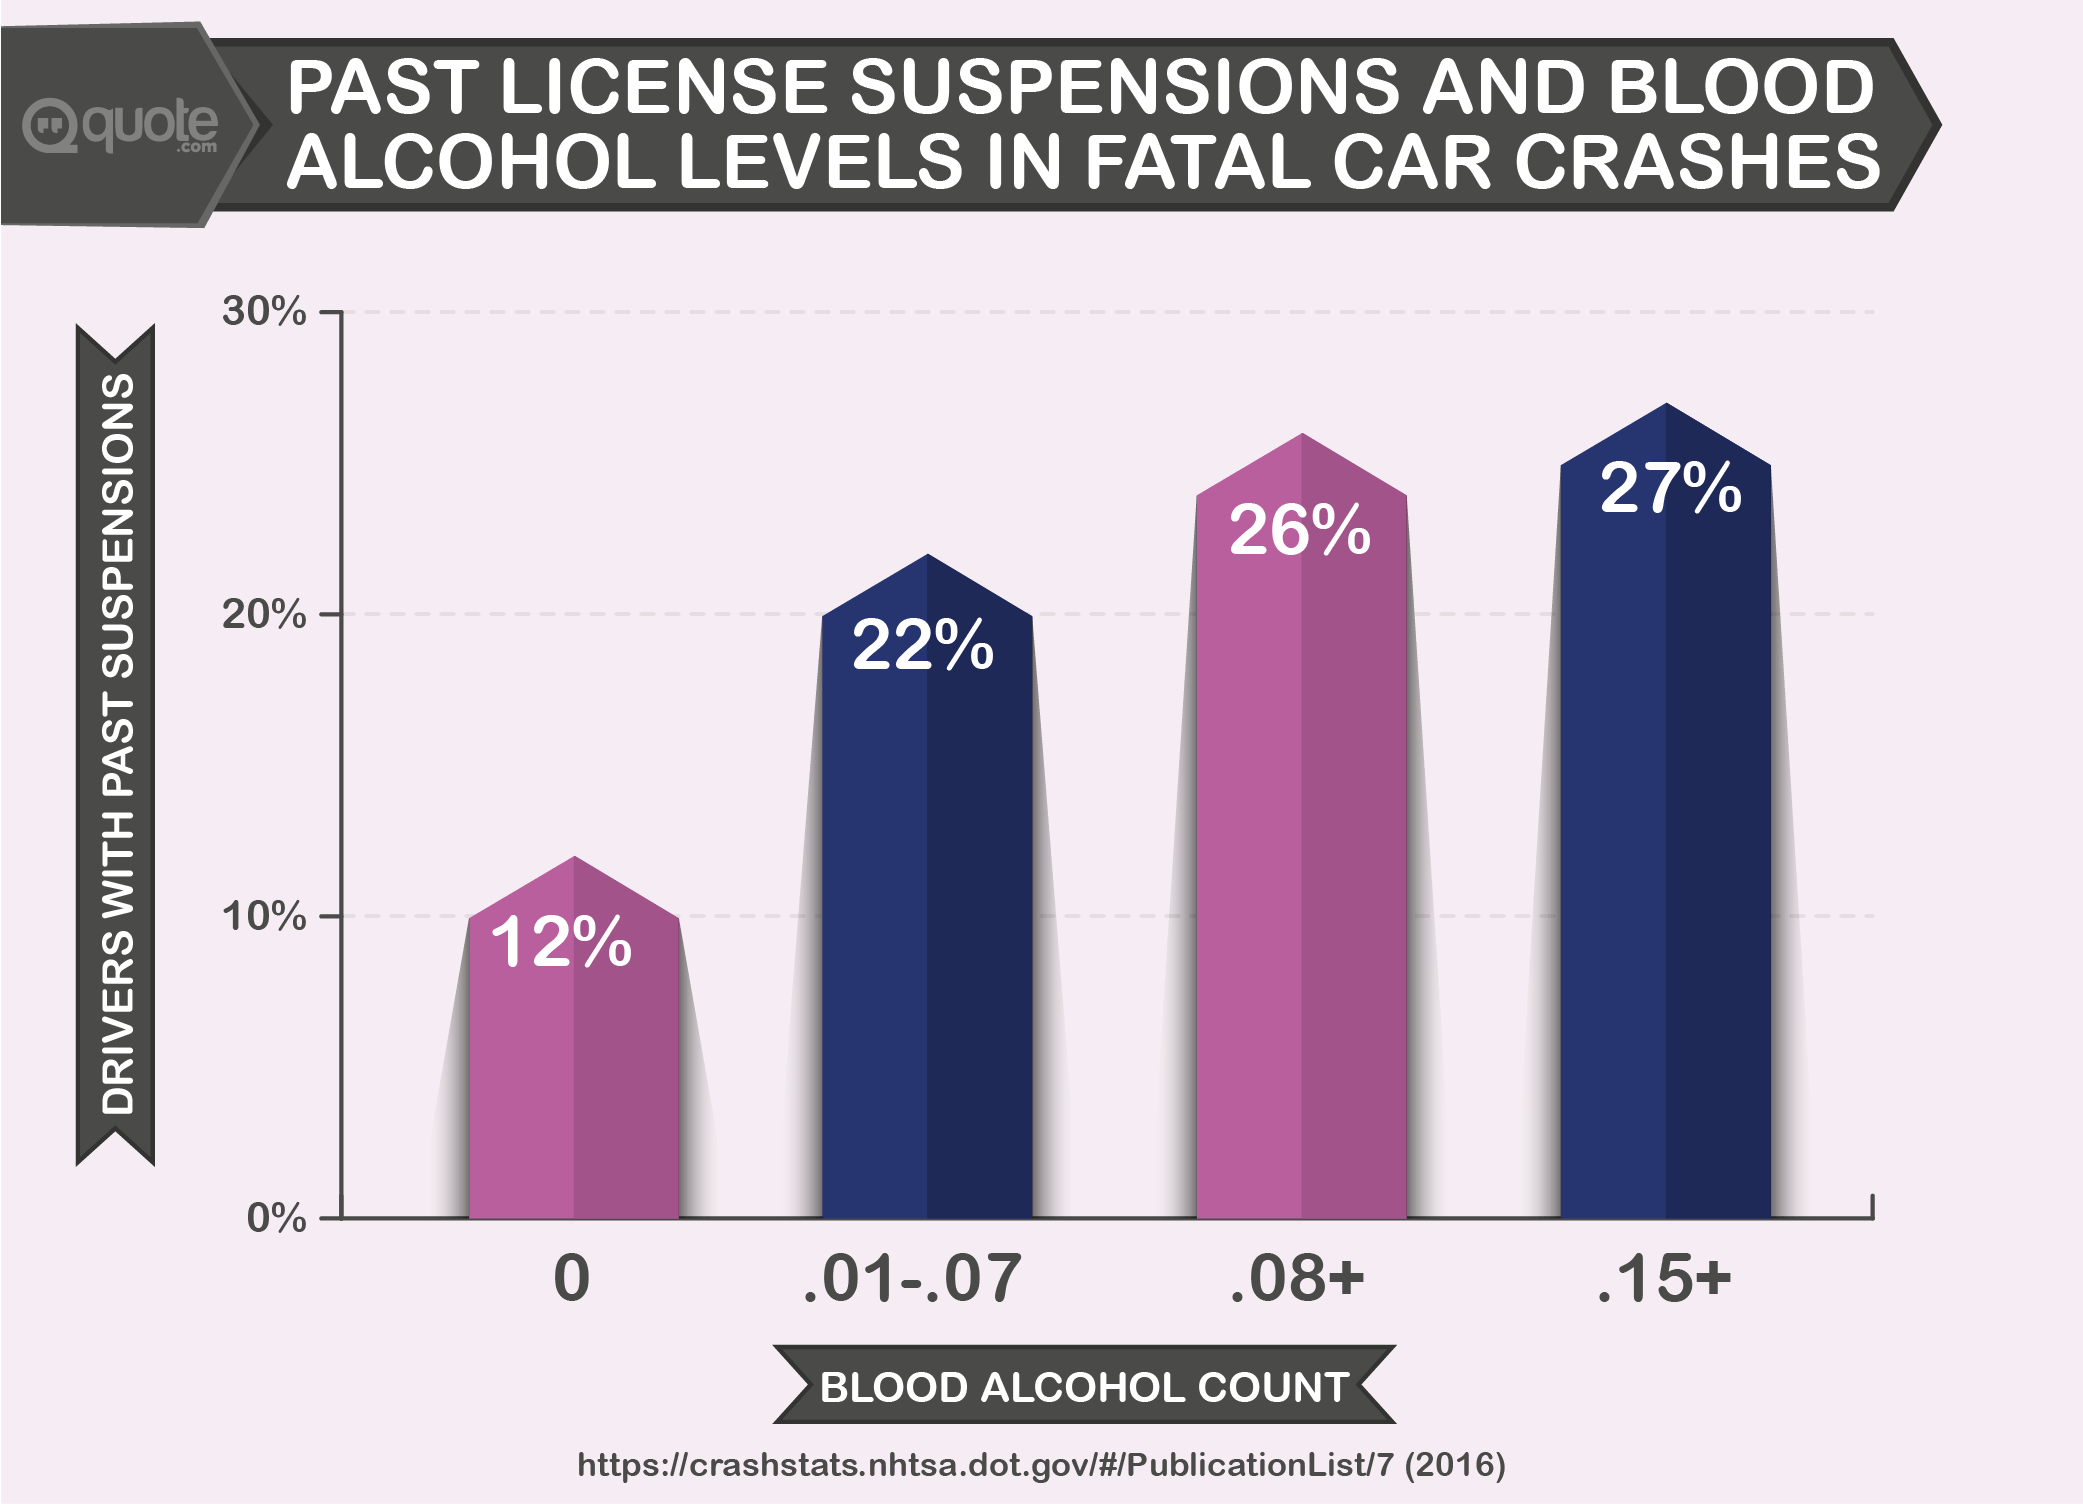 Past License Suspensions and Blood Alcohol Levels in Fatal Car Crashes